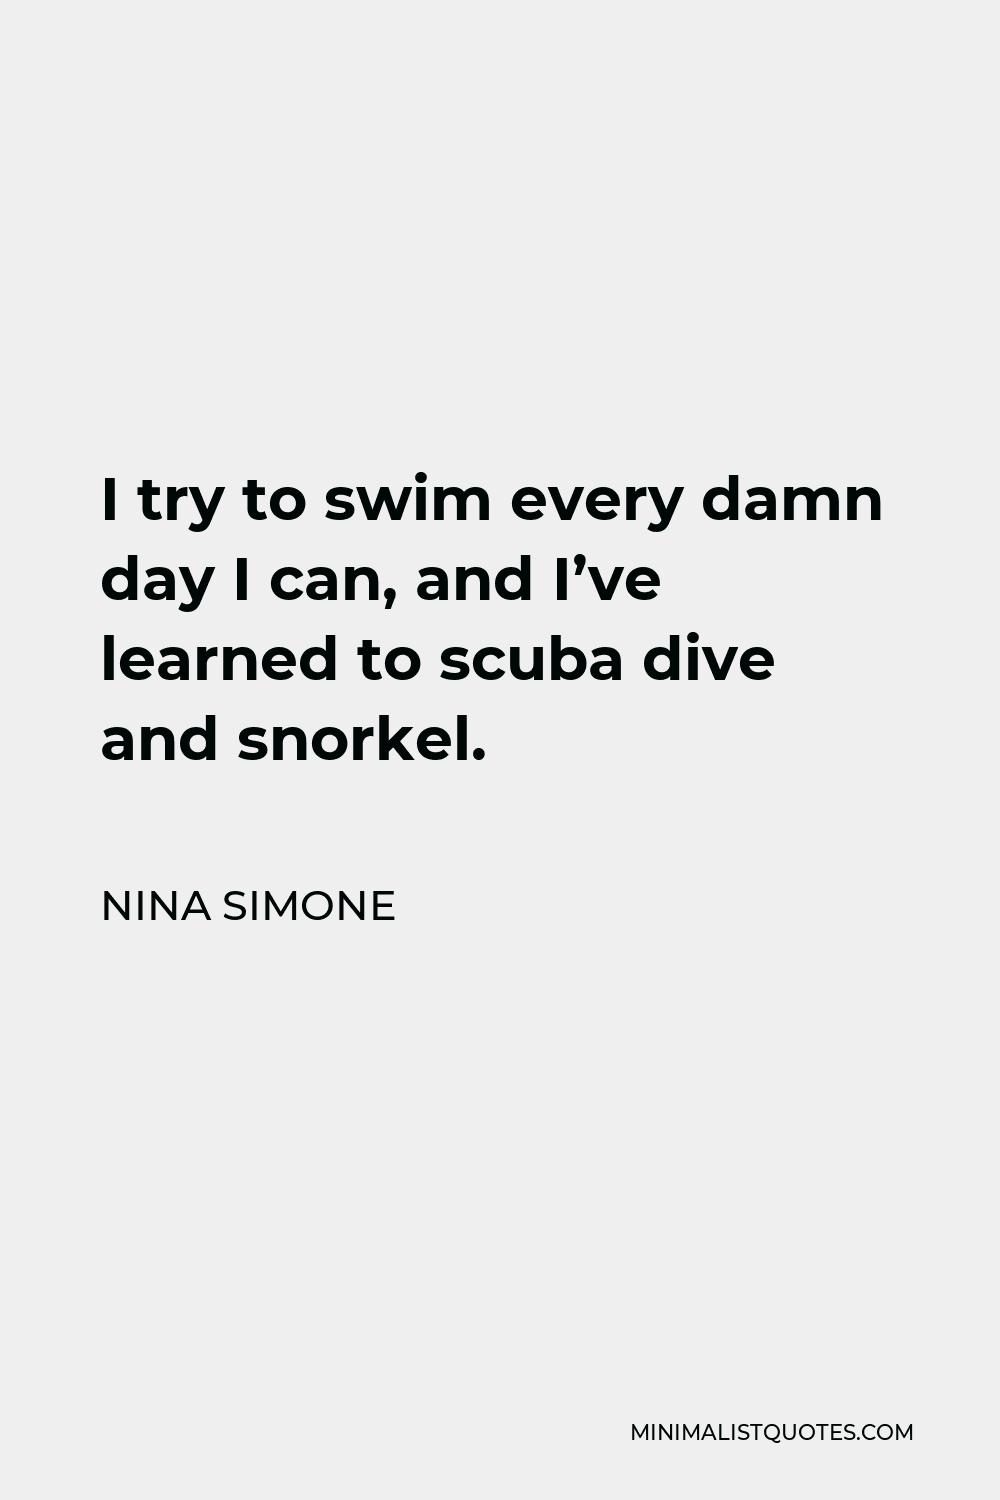 Nina Simone Quote - I try to swim every damn day I can, and I’ve learned to scuba dive and snorkel.